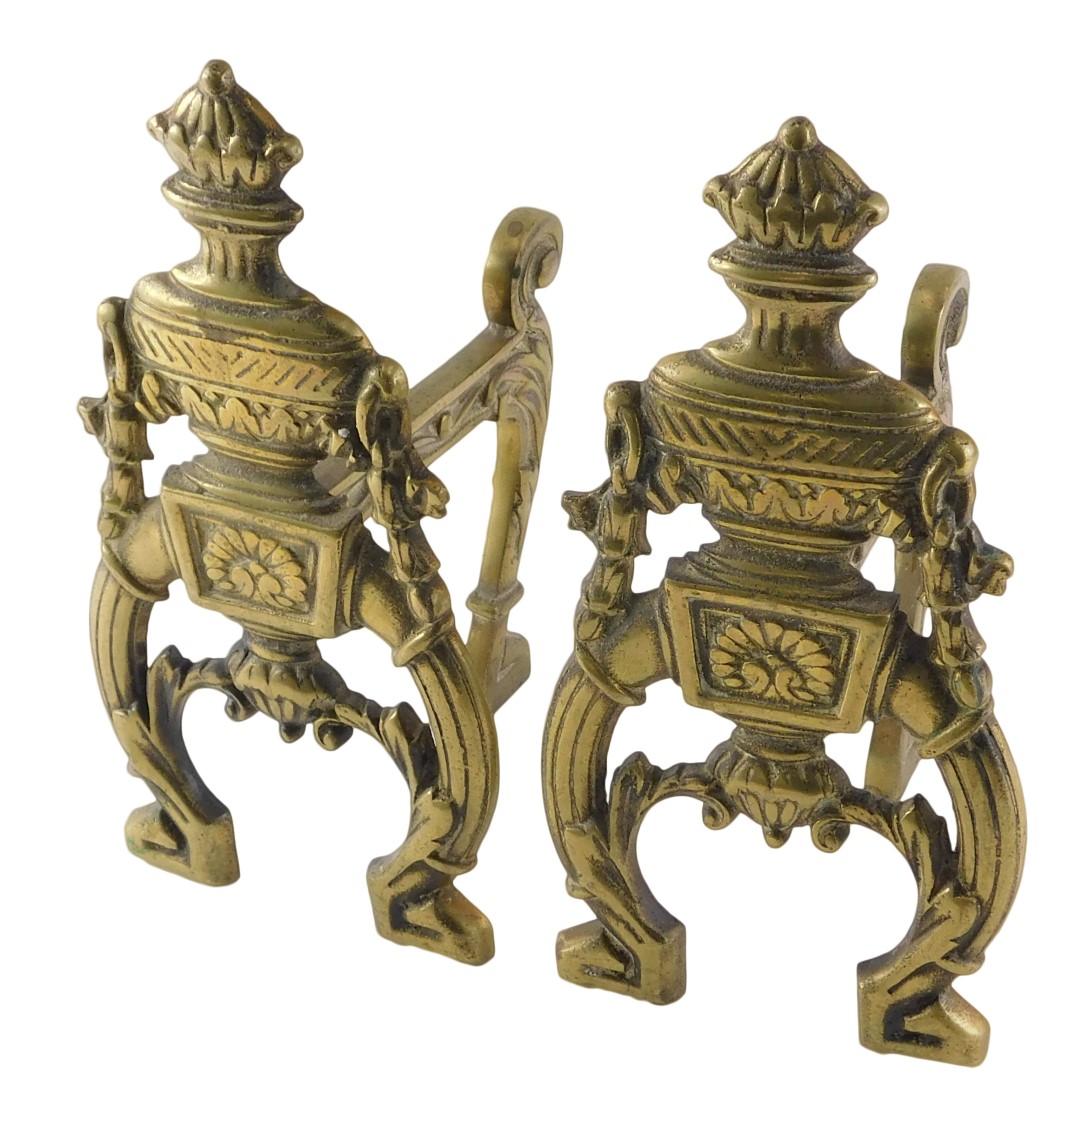 A pair of late 19th/early 20thC Adam Revival brass fire dogs or andirons, each cast with urns and fl